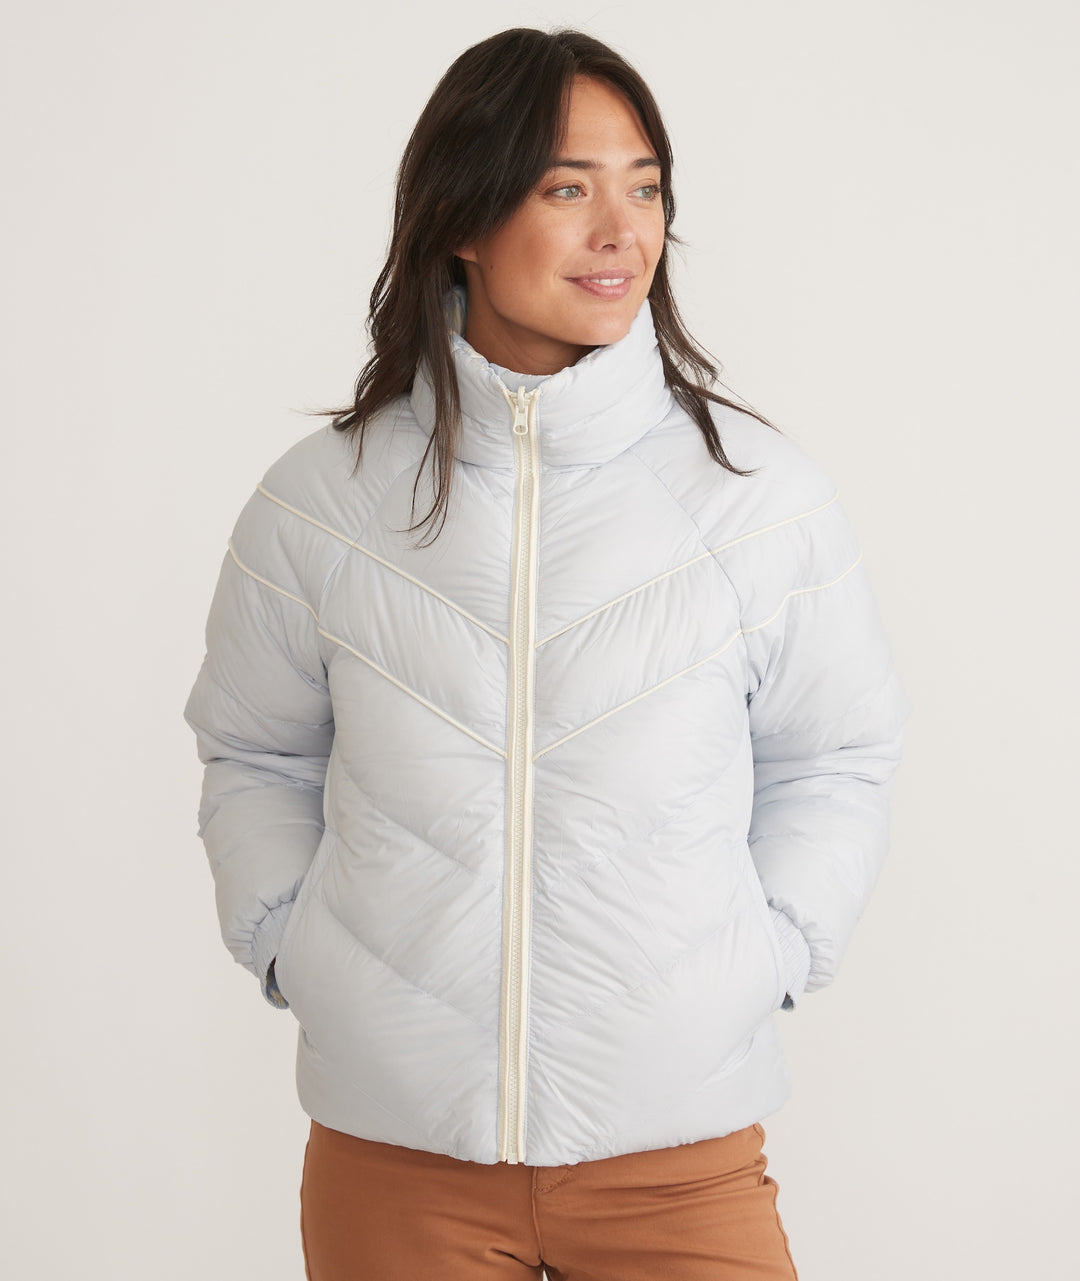 Marine Layer Archive Reversible Puffer